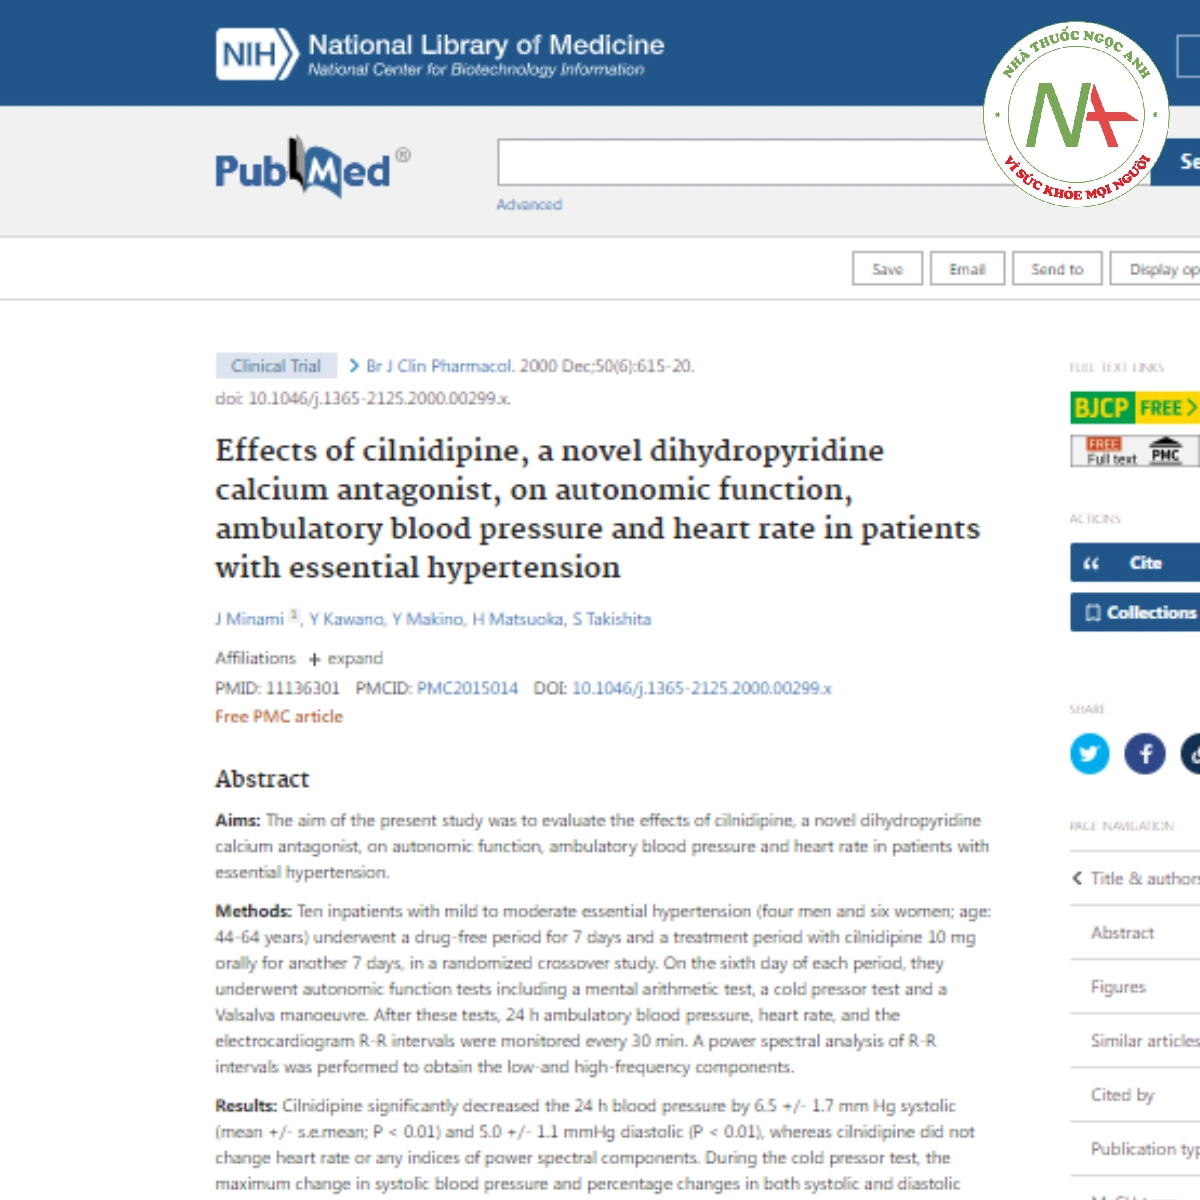 Effects of cilnidipine, a novel dihydropyridine calcium antagonist, on autonomic function, ambulatory blood pressure and heart rate in patients with essential hypertension